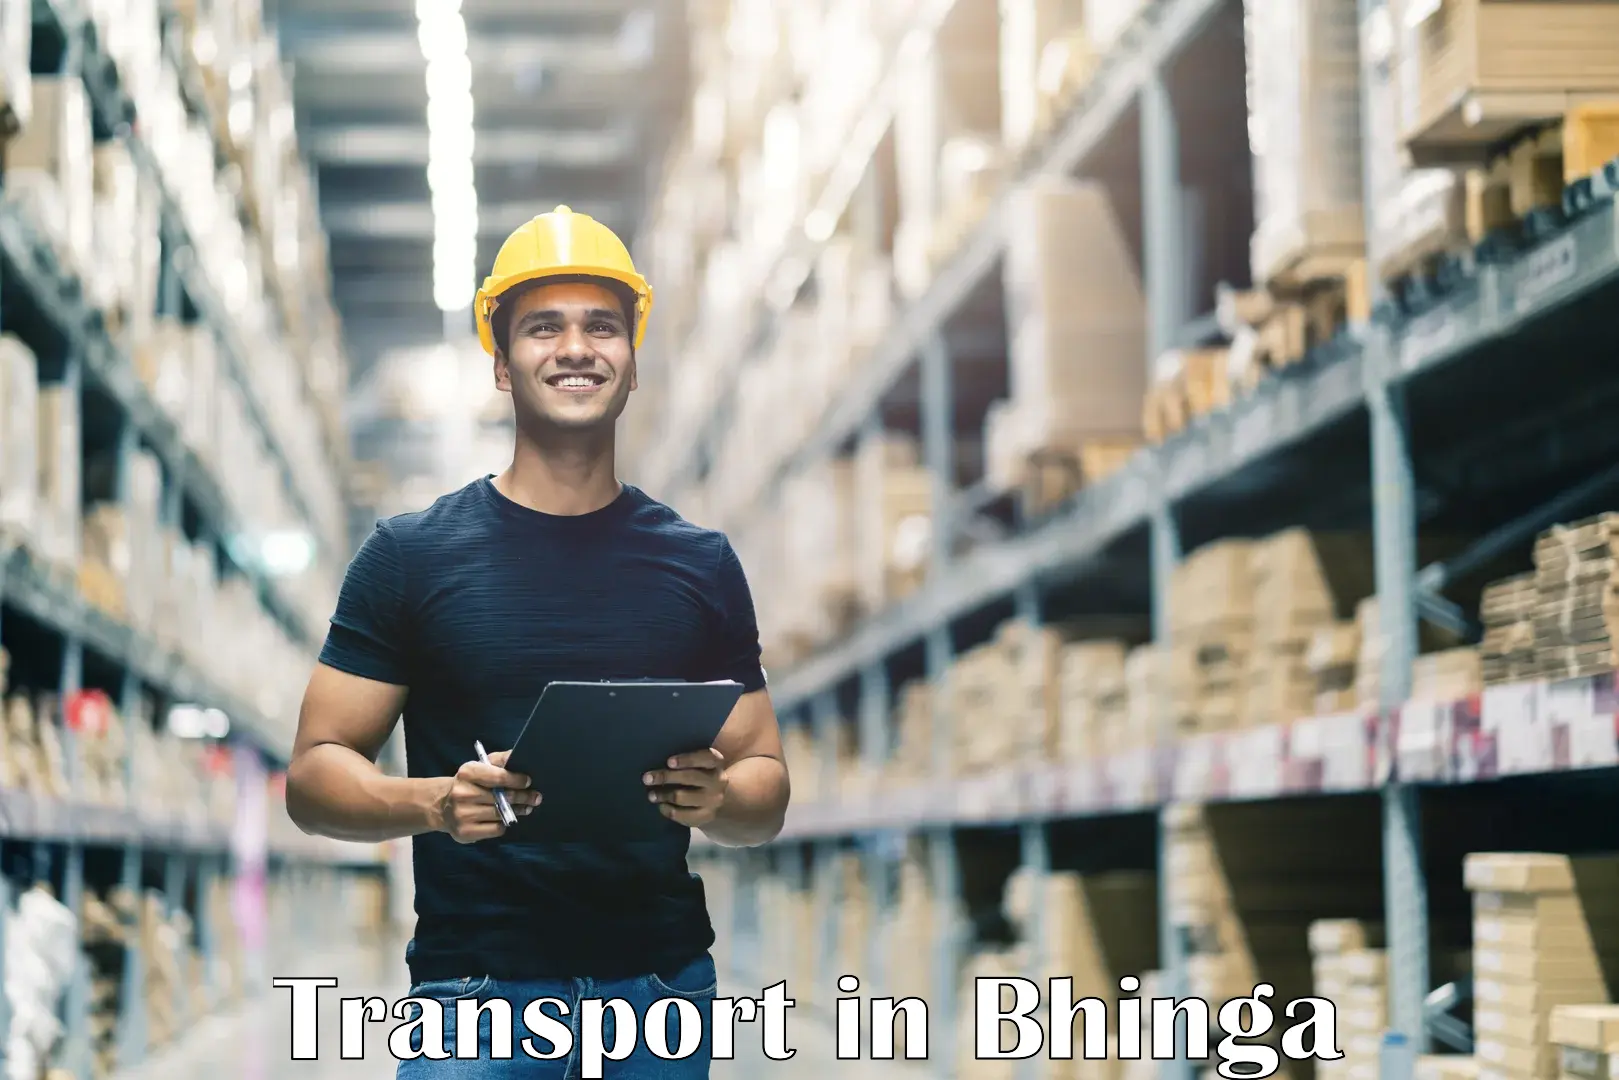 Container transportation services in Bhinga